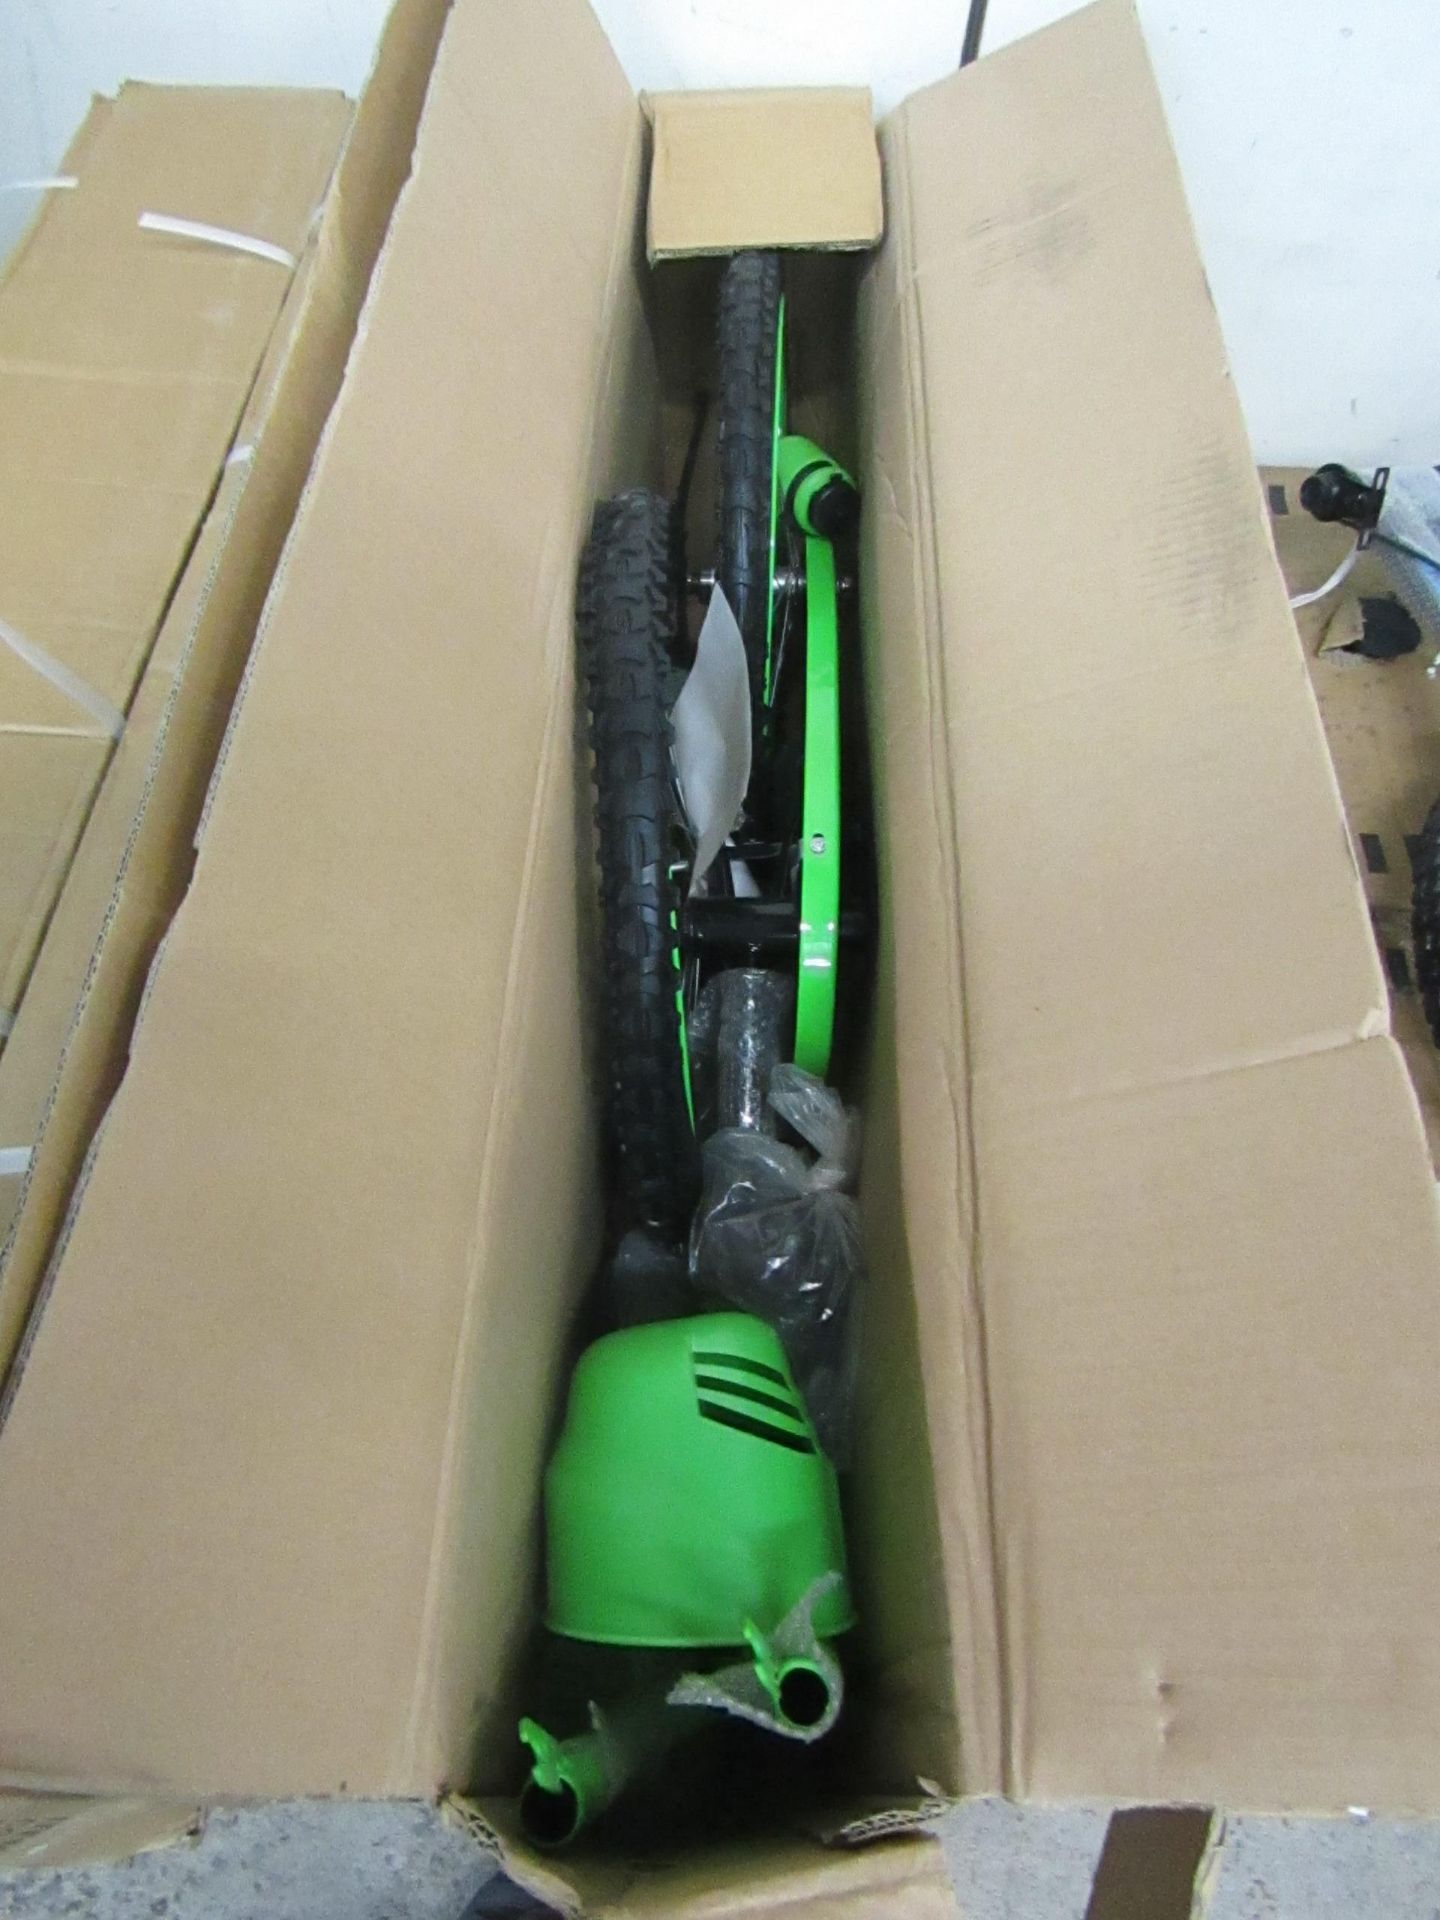 14" Child's Bike new and Boxed, comes complete with front basket, mud guards, water bottle and